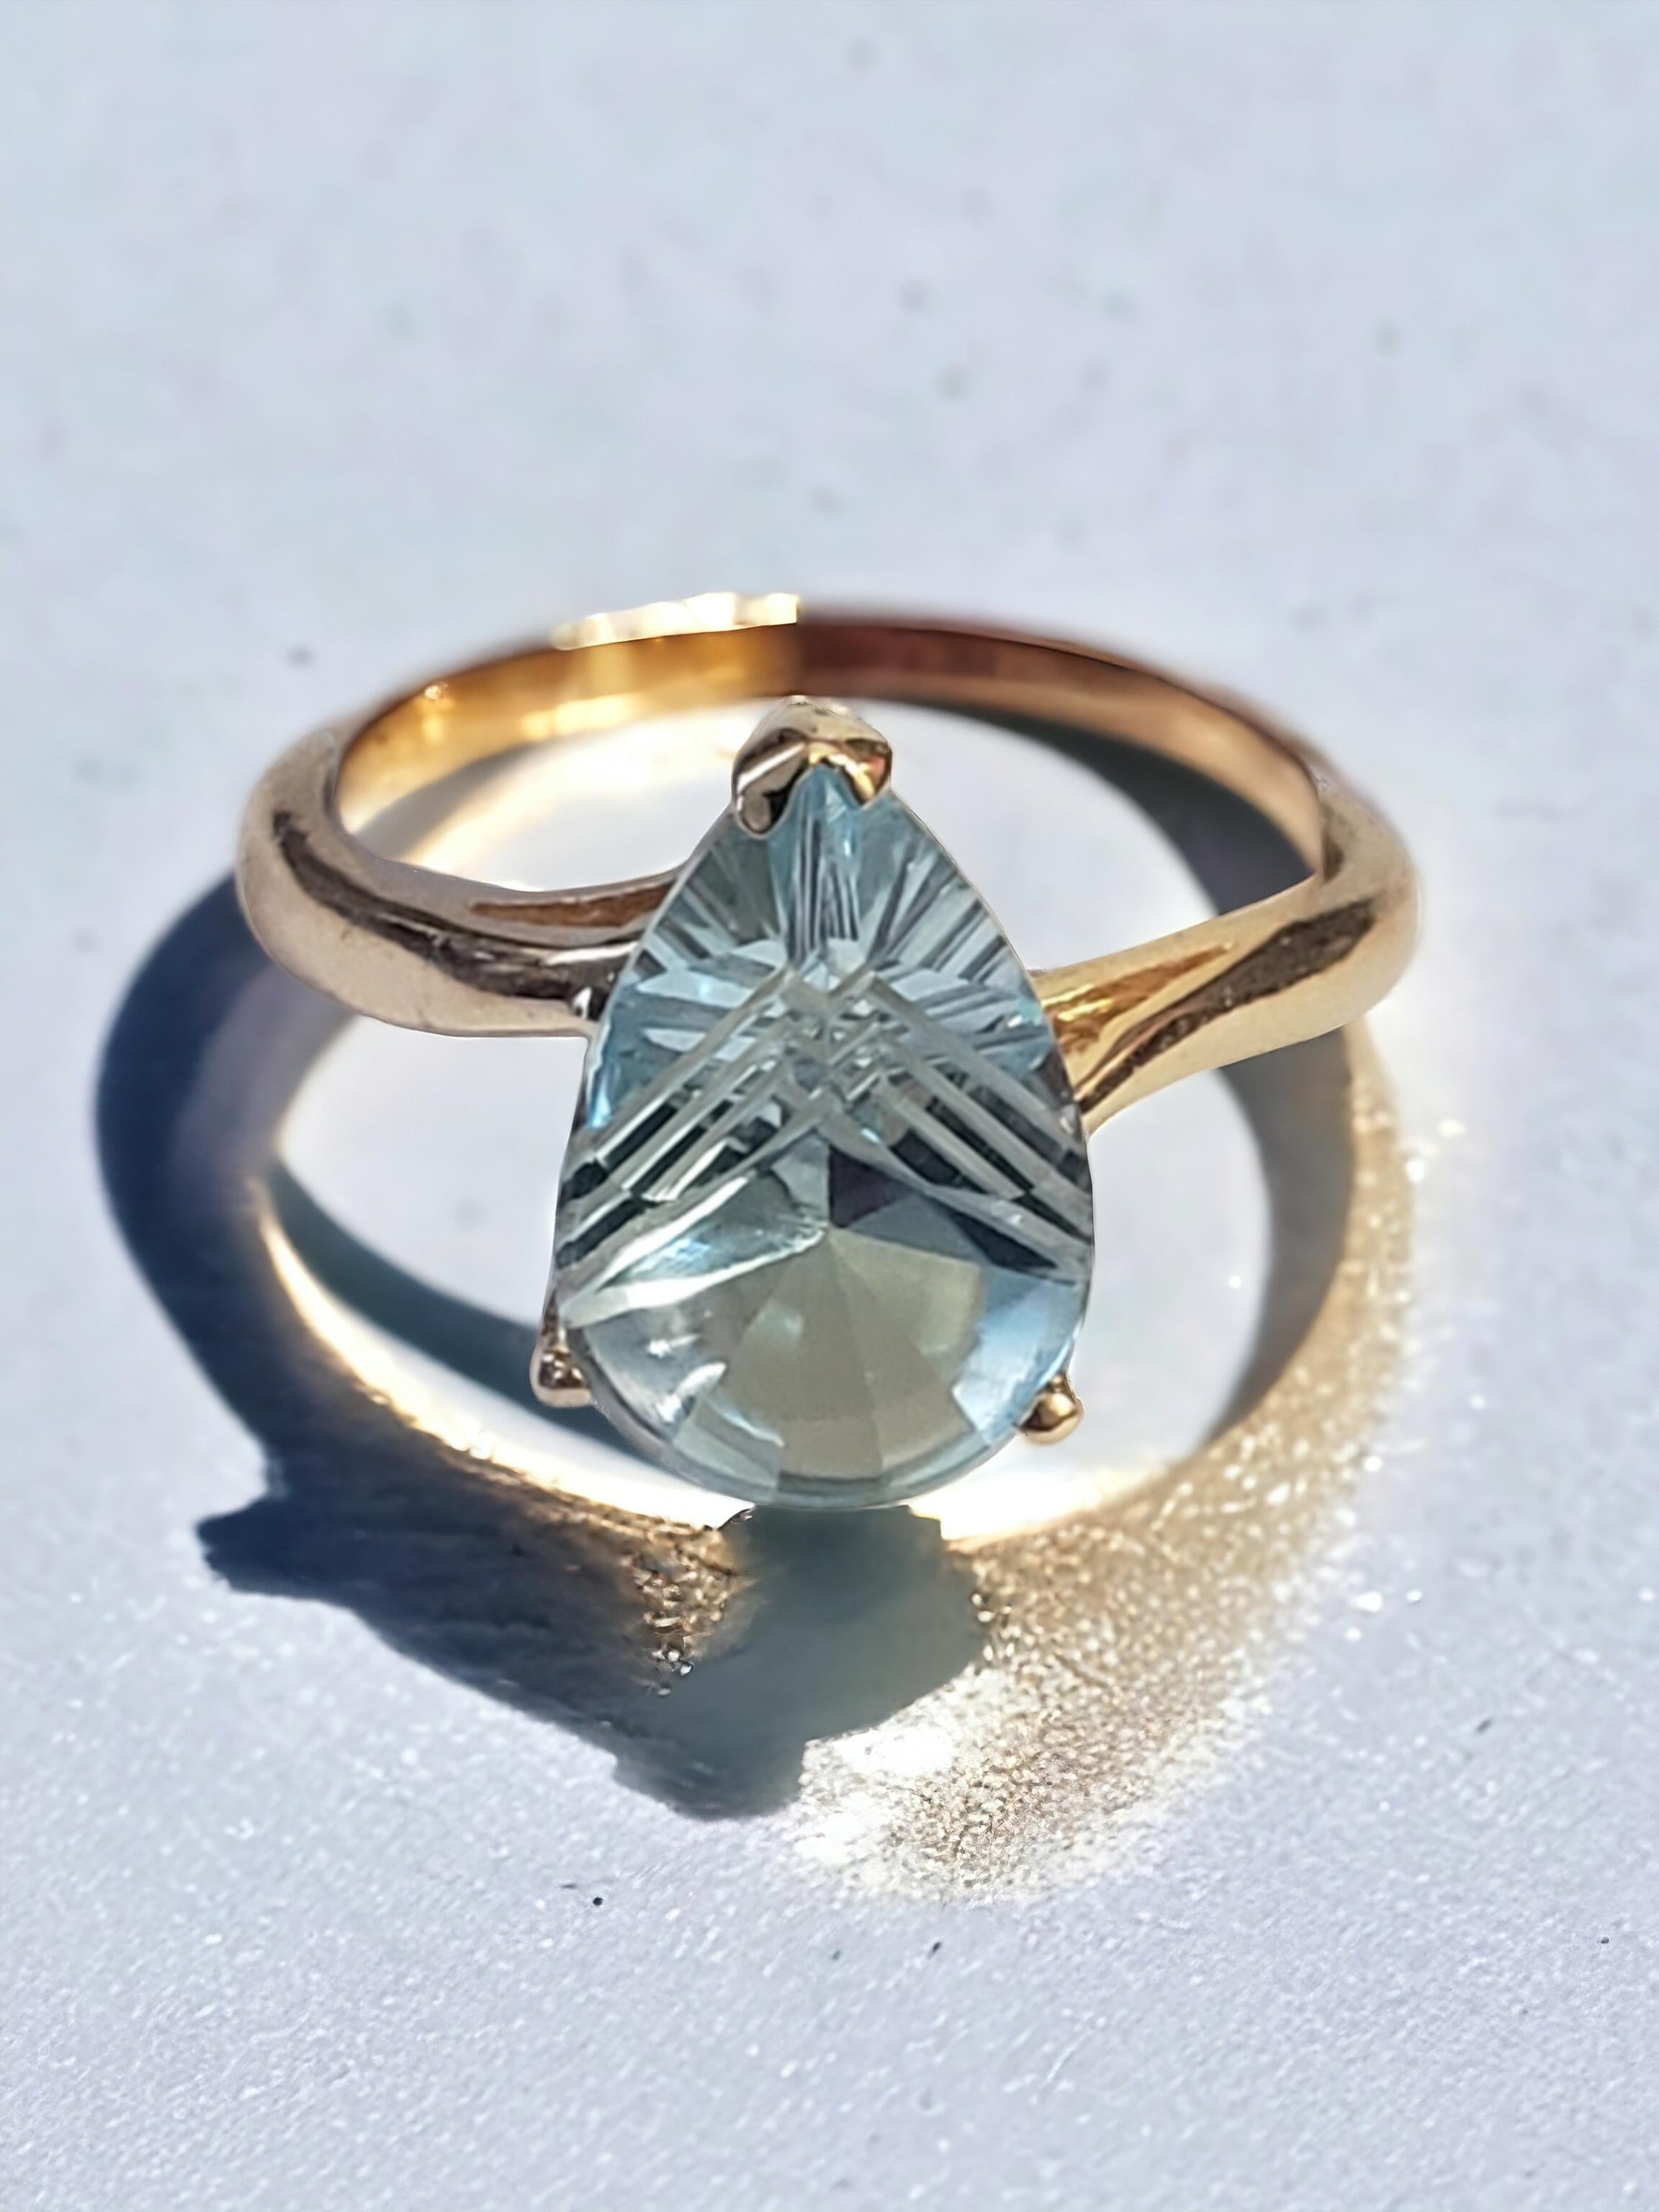 NEW Fantasy Special Cut 3 Ct. Natural Sky Blue Topaz Ring in 14k Yellow Gold For Sale 2